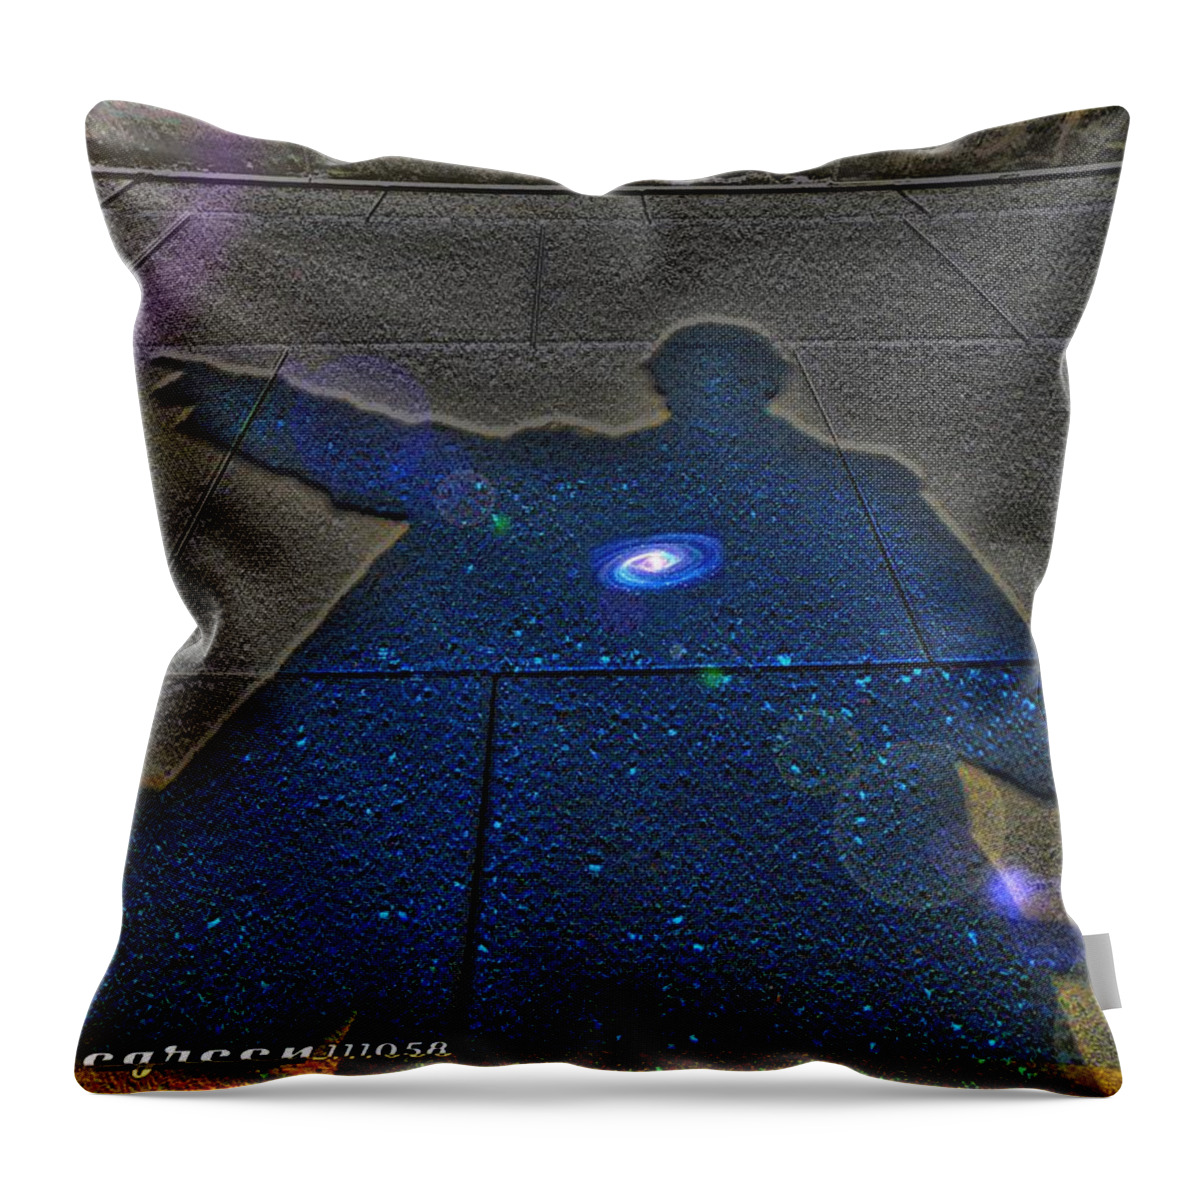 Man Throw Pillow featuring the digital art When I Look Inside by Vincent Green